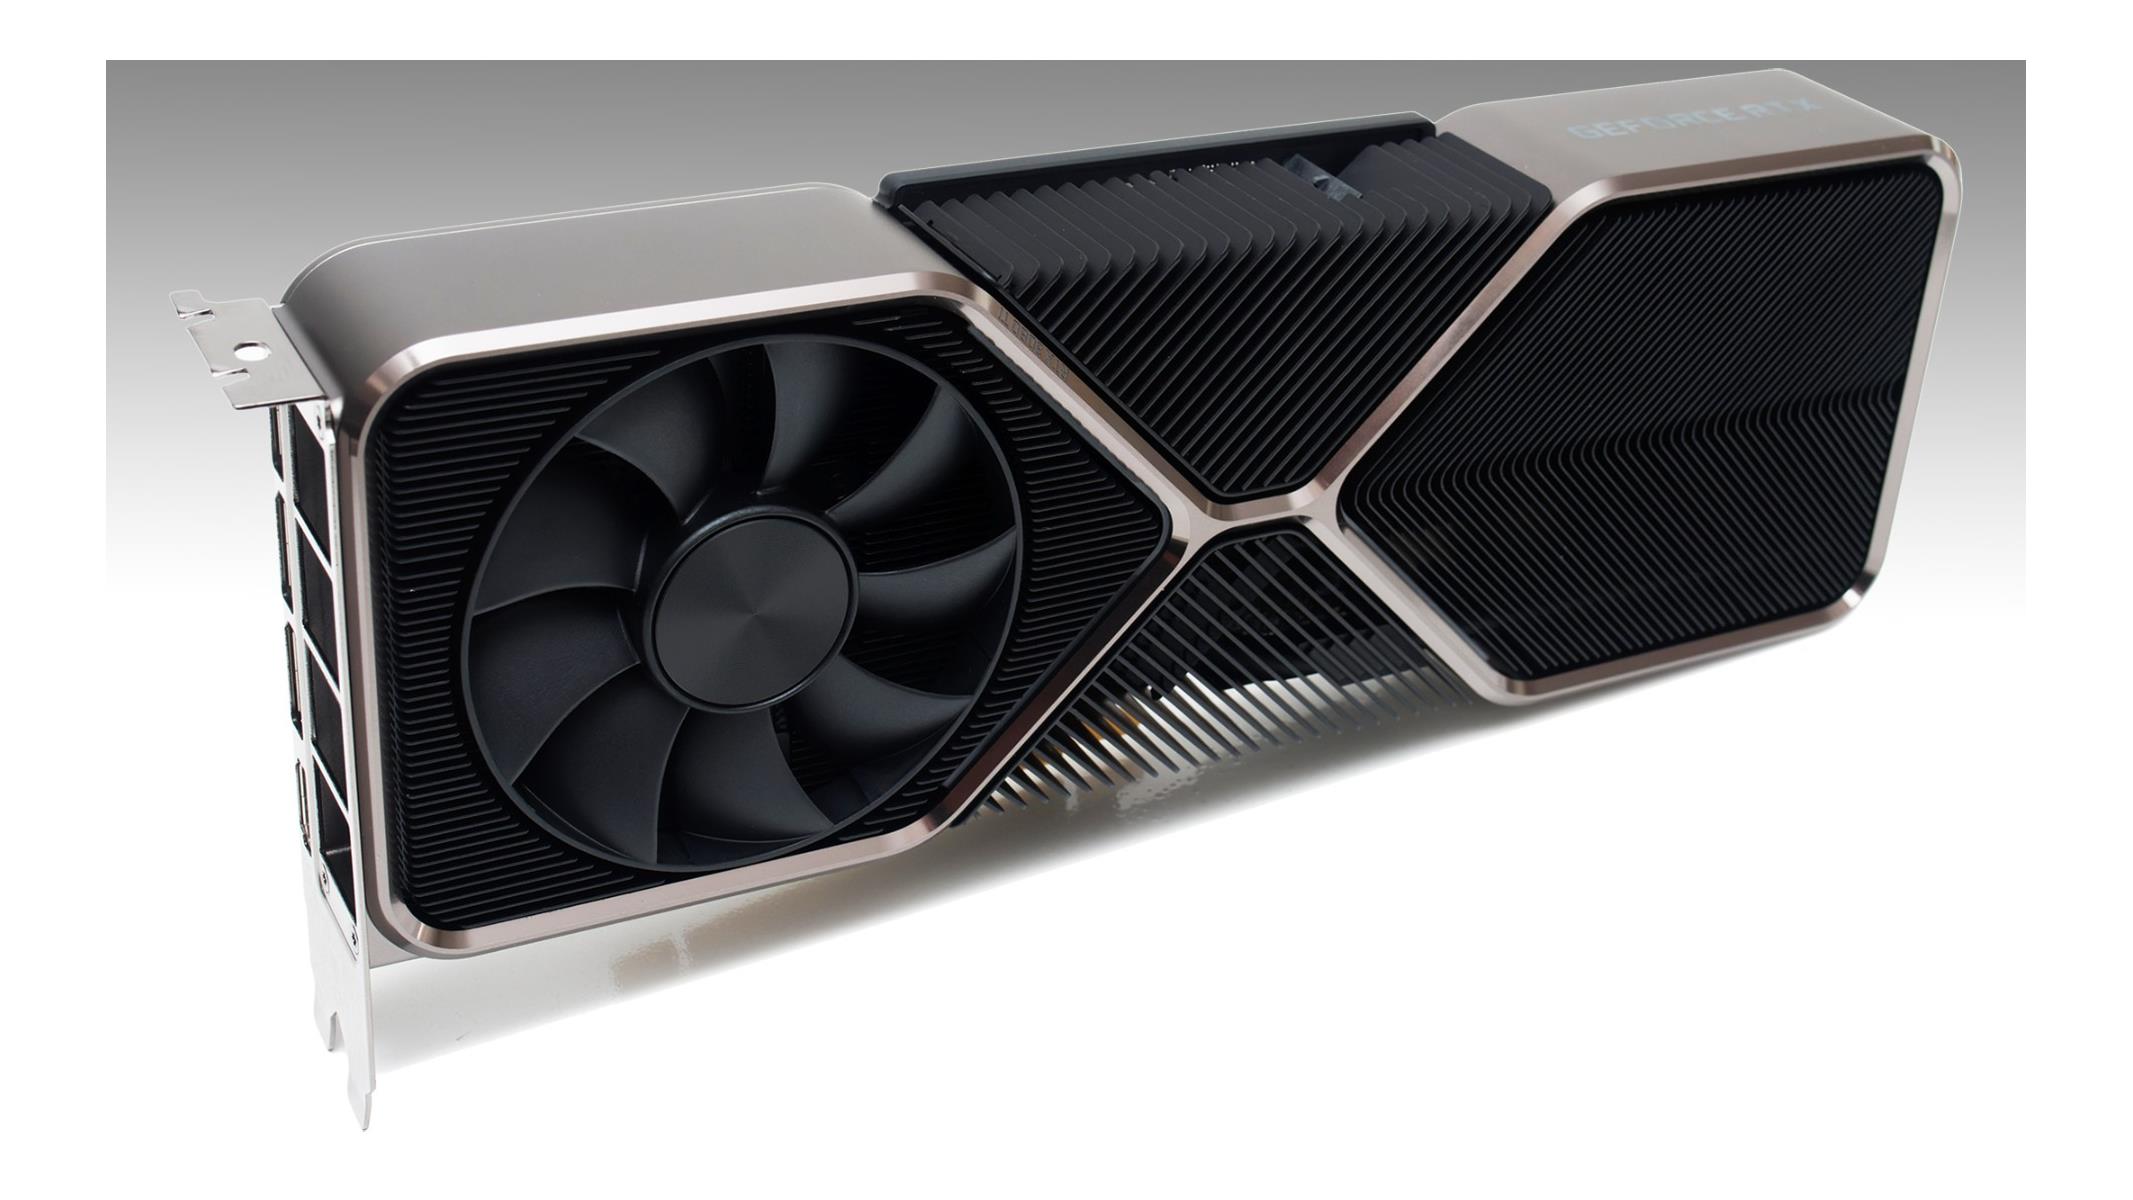 NVIDIA GeForce RTX 3080 Ti Review 